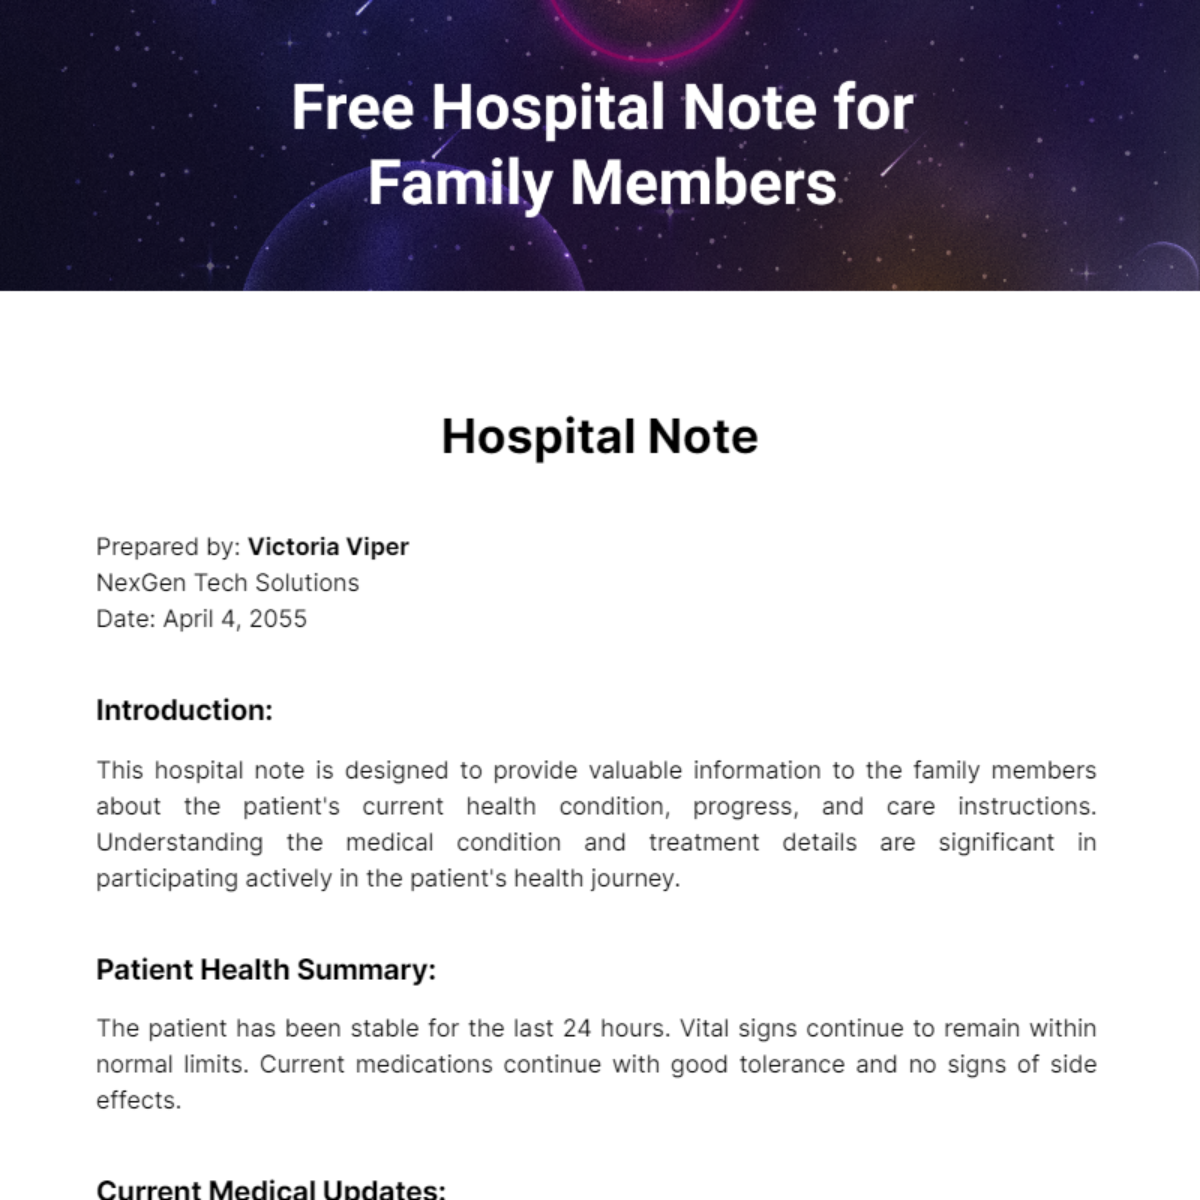 Hosptial Note for Family Members Template